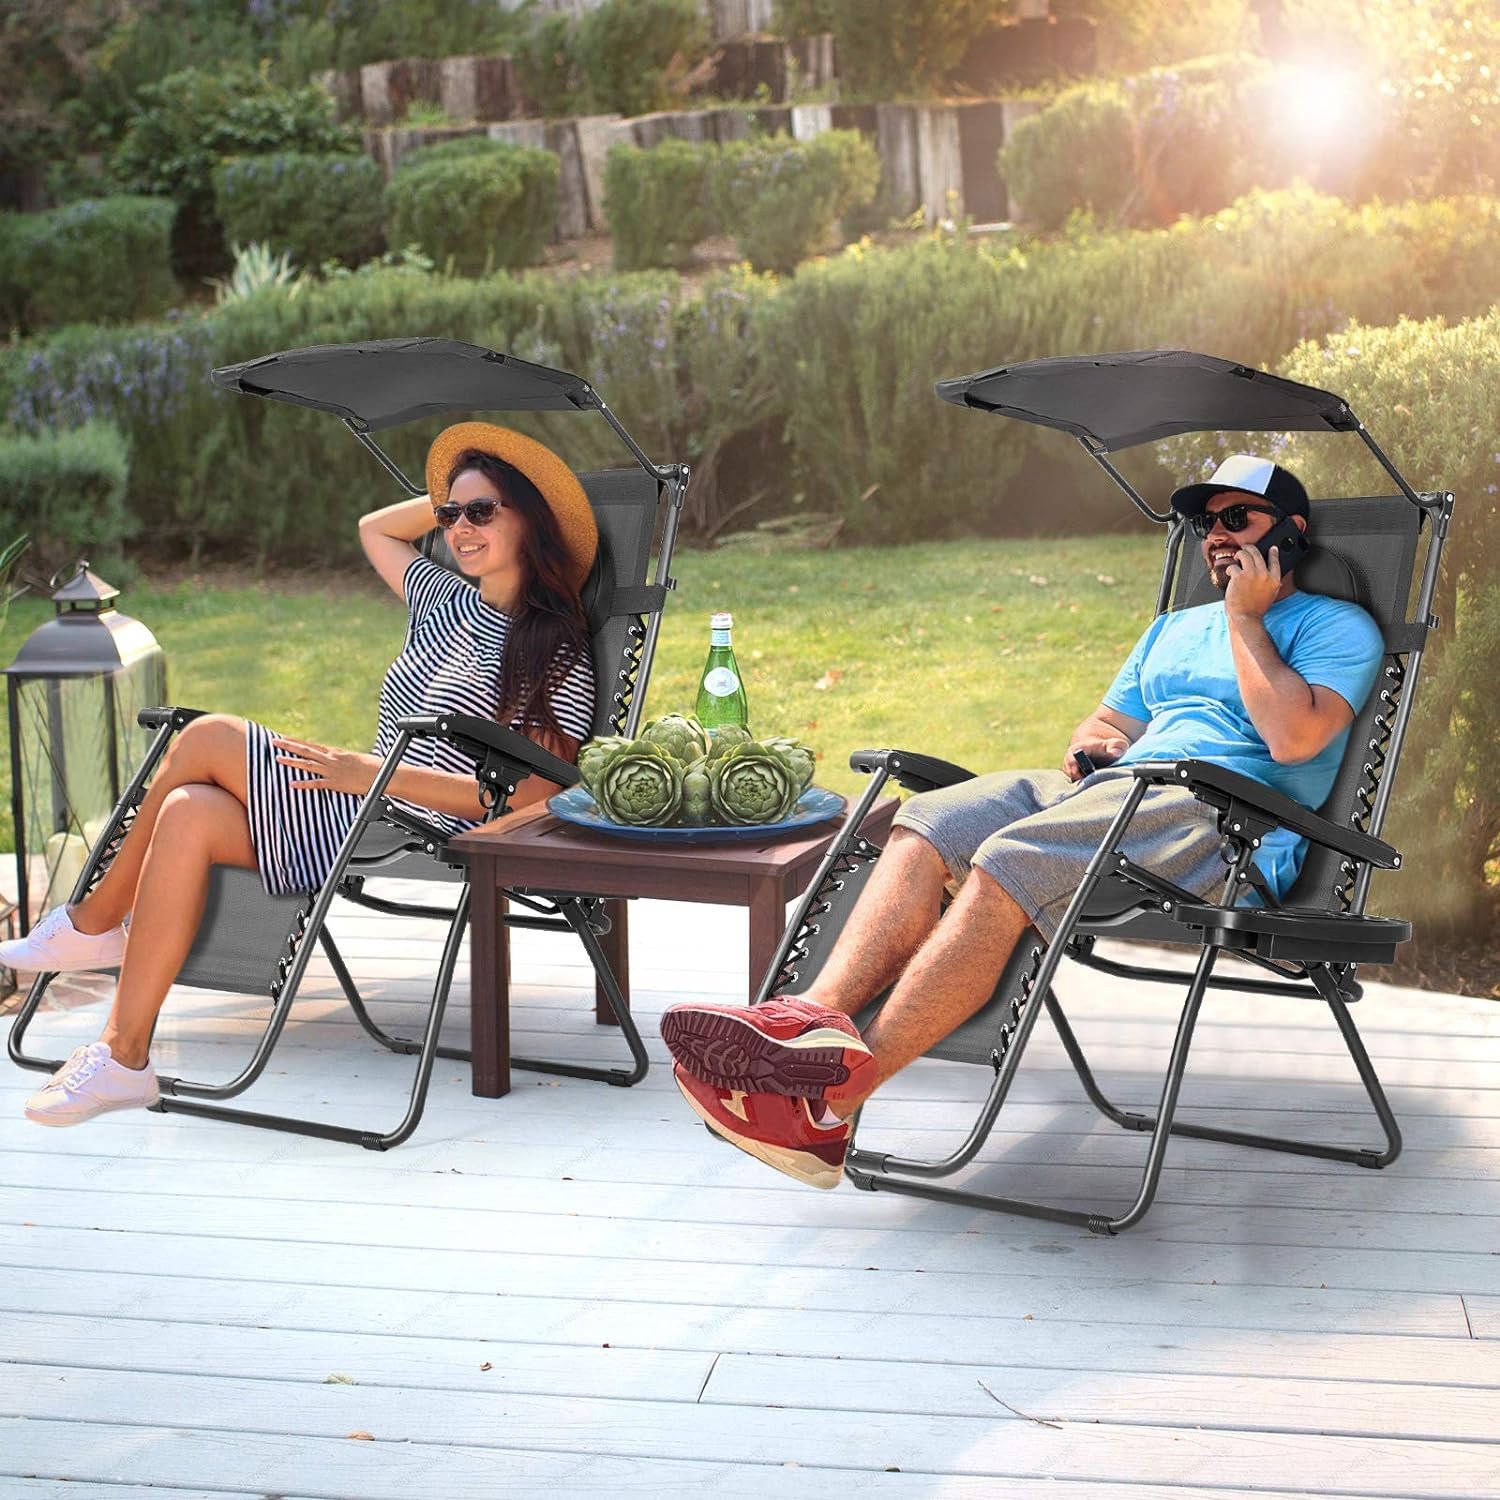 S AFSTAR Zero Gravity Chair with Shade Canopy, Reclining Lounge Chair with Adjustable Canopy Headrest, 0-170 Degrees Recliner  Cup Holder, Folding Zero Gravity Lawn Chair for Patio Poolside, Burgundy